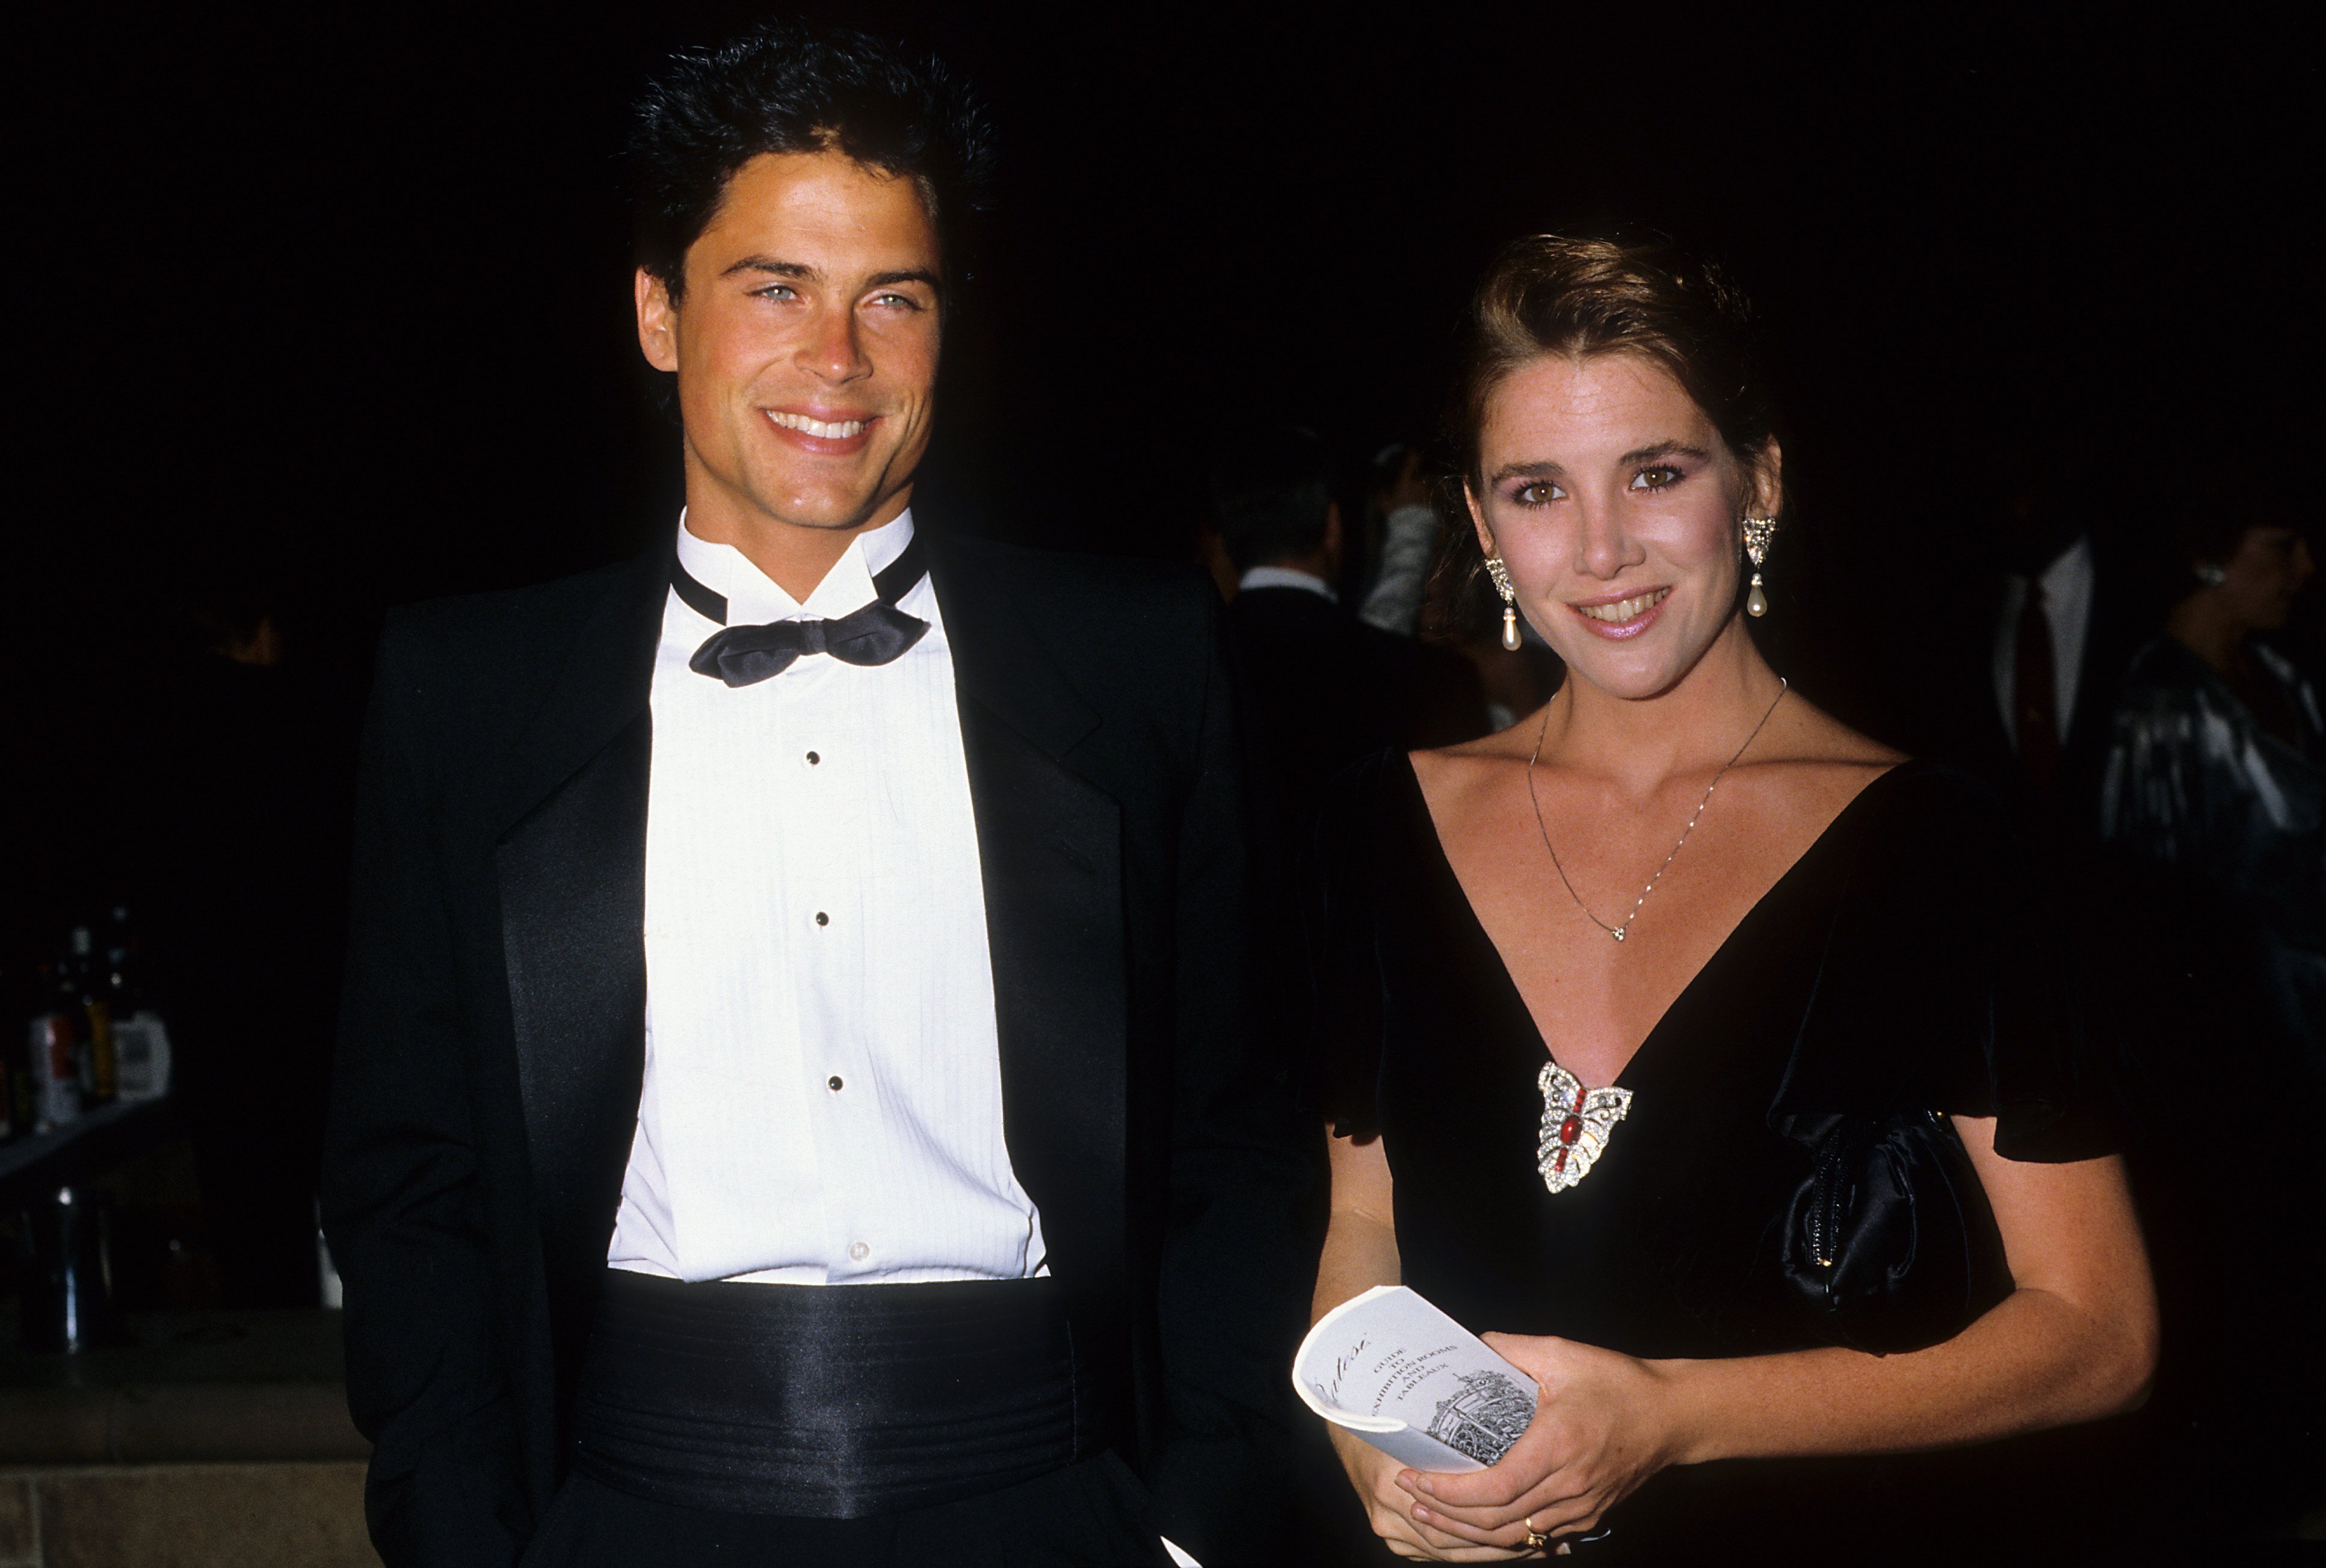 Rob Lowe and Melissa Gilbert pose for a portrait in 1987 in Los Angeles, California | Source: Getty Images